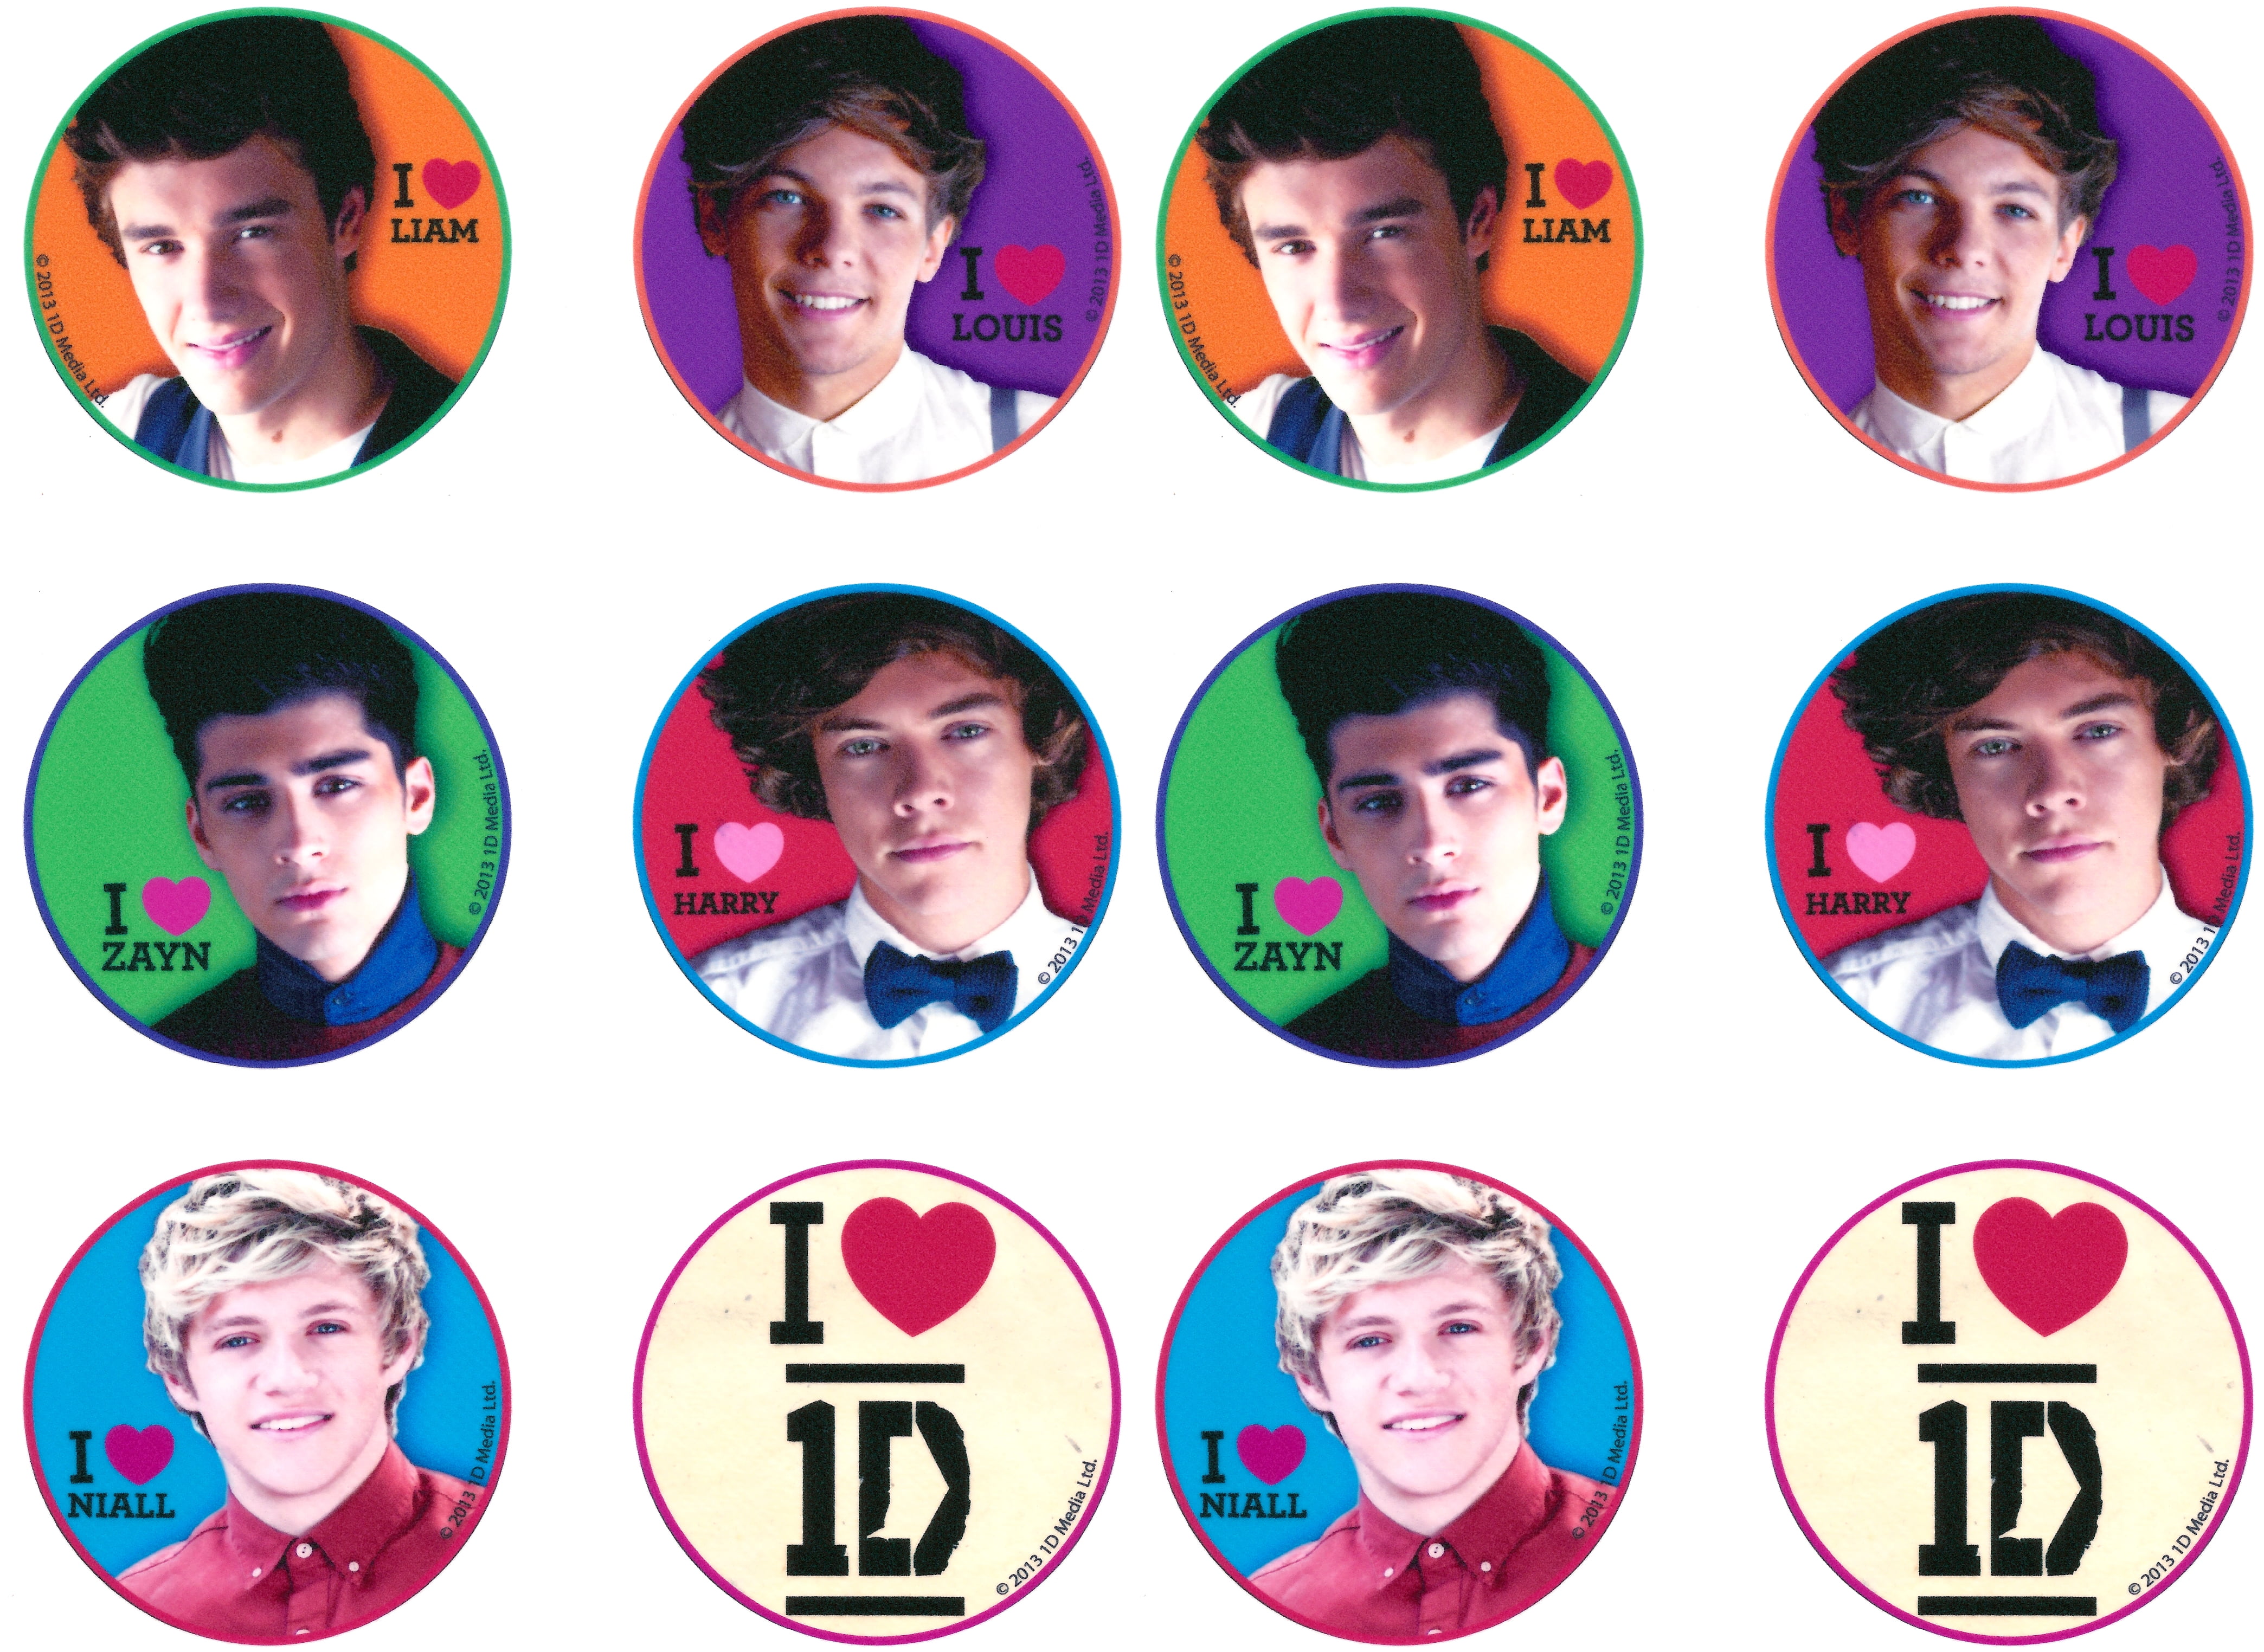 One Direction Niall Horan Liam Payne Harry Styles Louis Tomlinsonb and Zayn  Malik Edible Cupcake Toppers Image ABPID03849 12 Count 